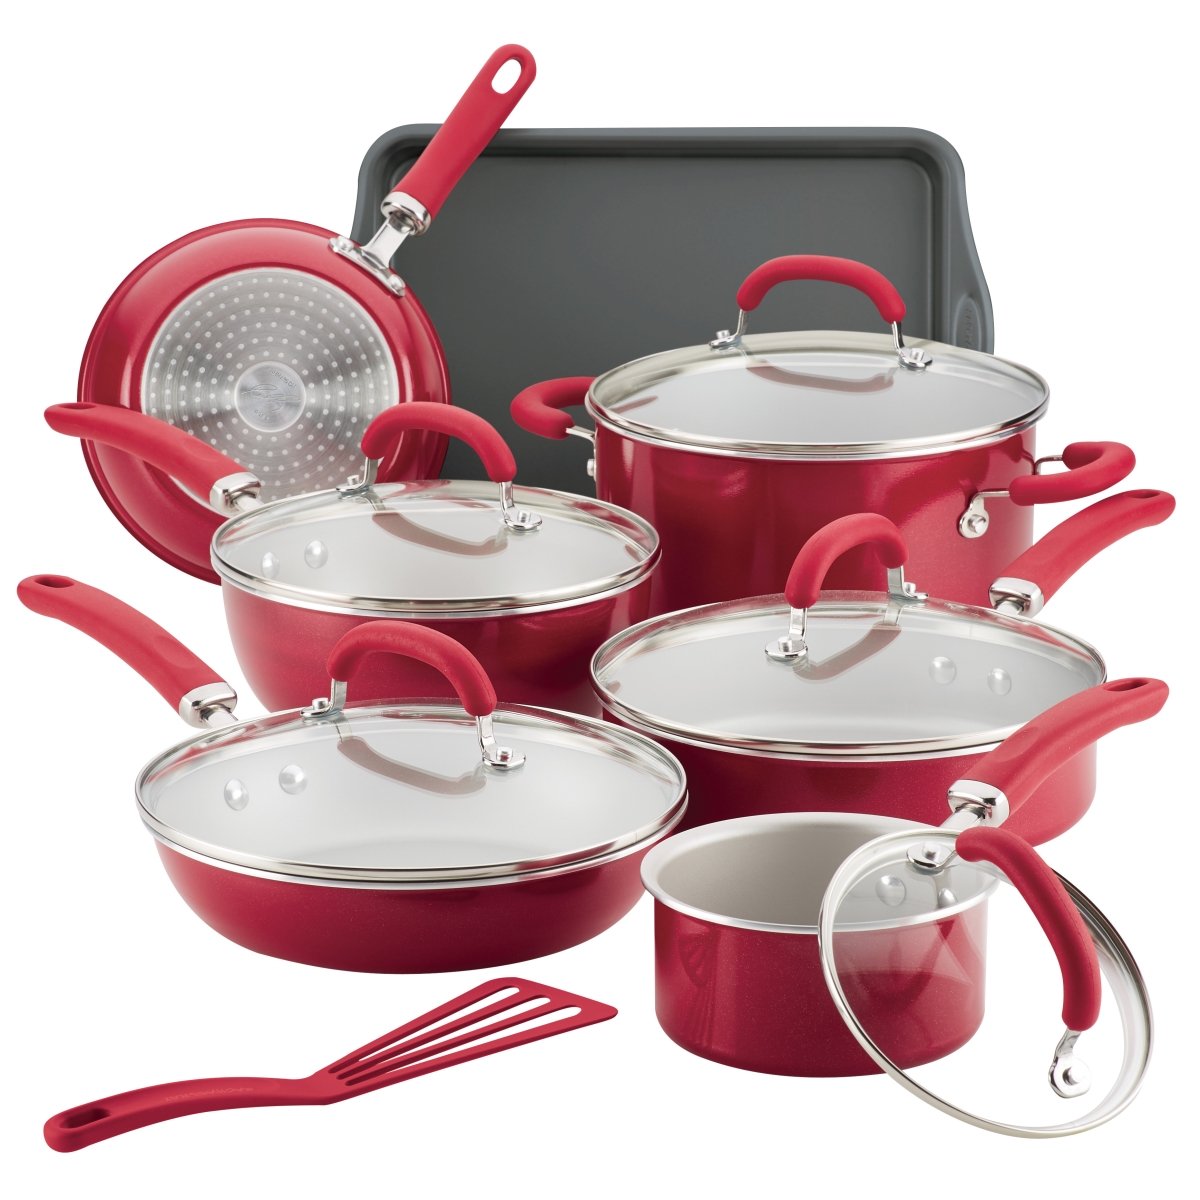 12147 Create Delicious Aluminum Nonstick Cookware Set, 13 Piece - Red Shimmer